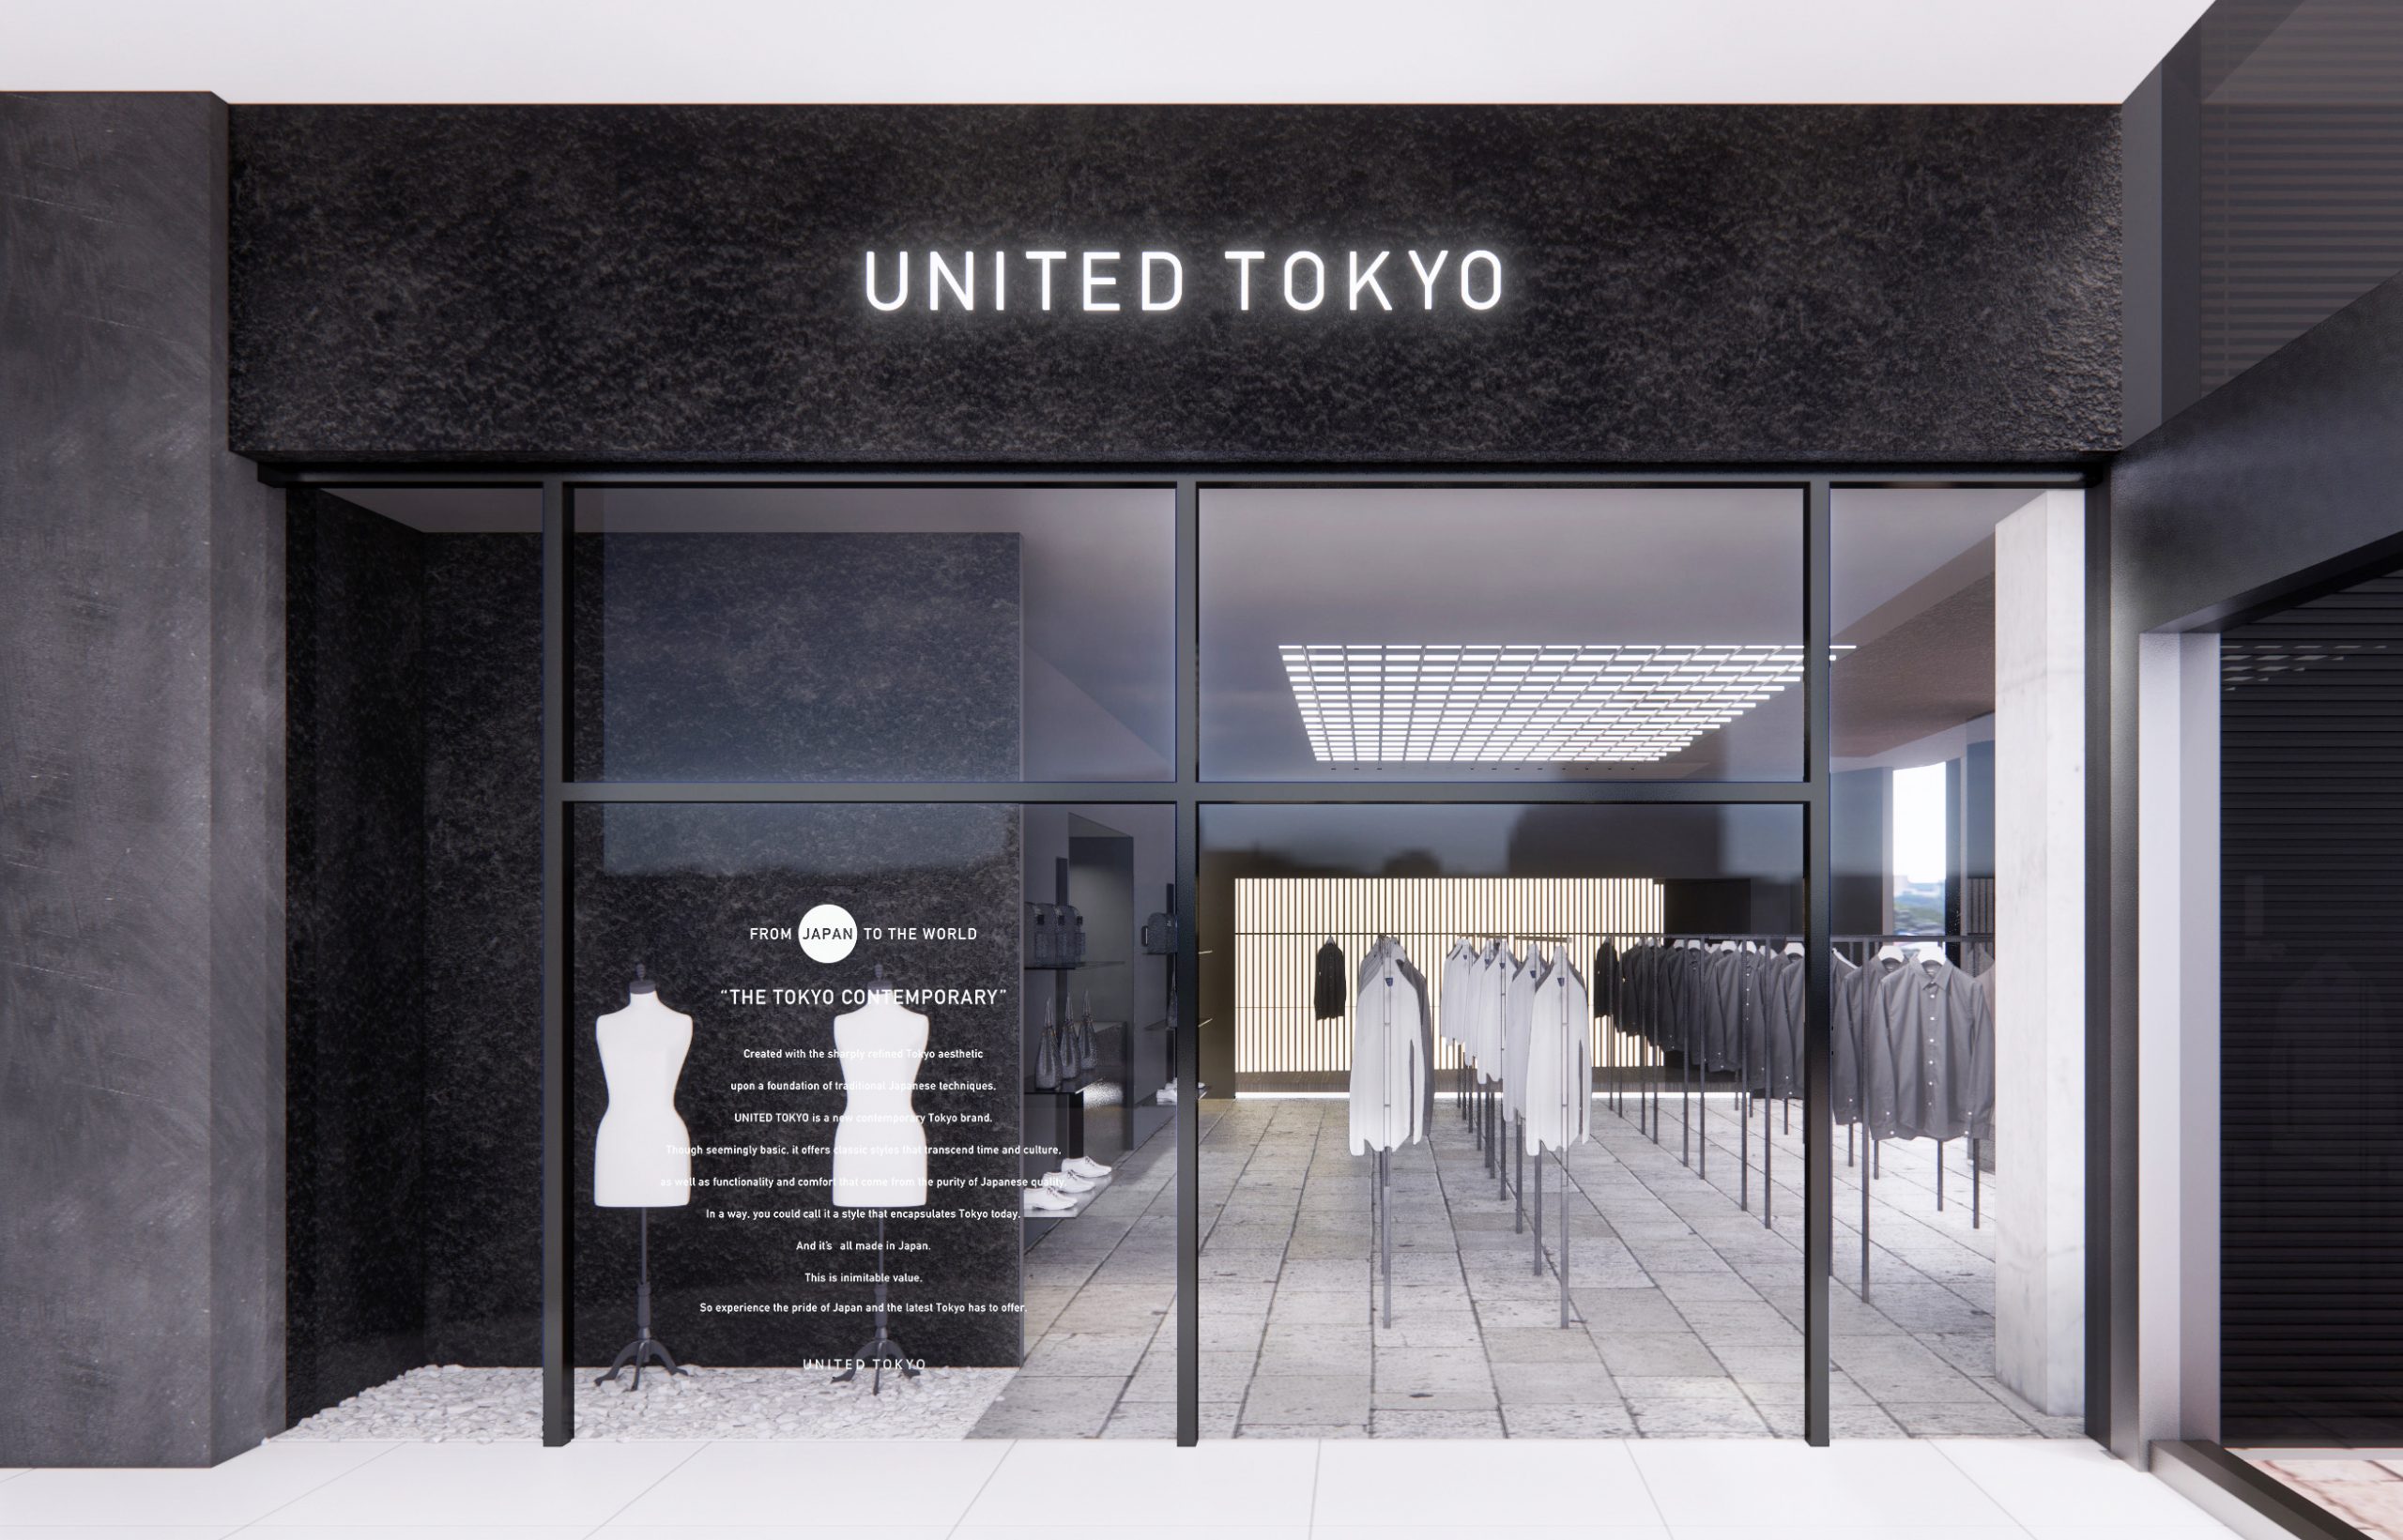 UNITED TOKYOが北京 朝陽大悦城にOPEN